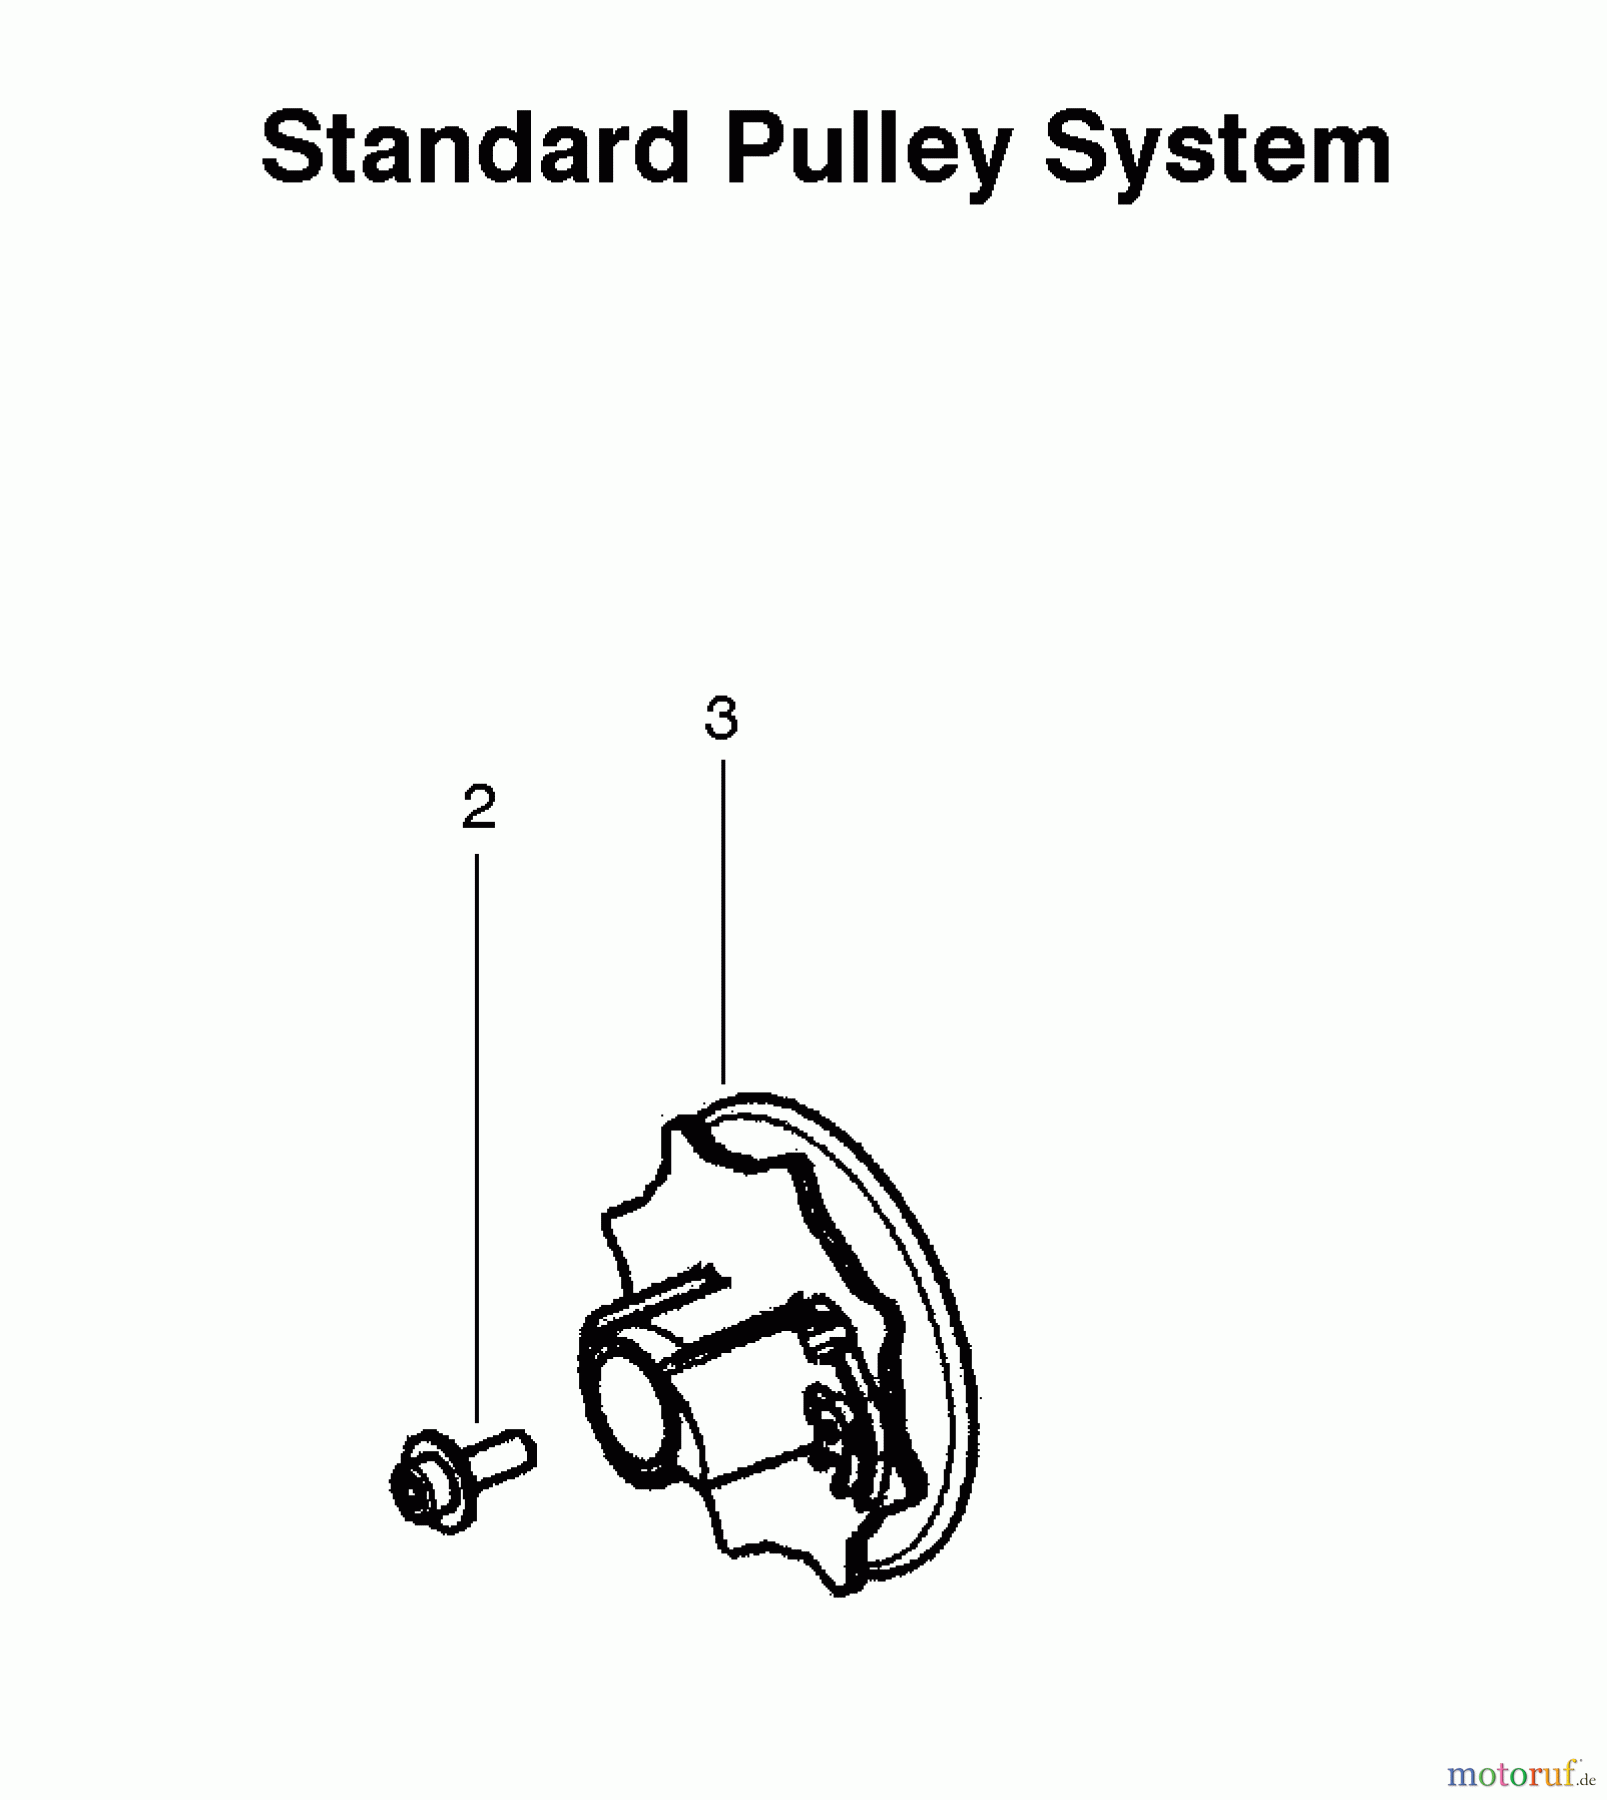  Poulan / Weed Eater Motorsägen P3314WS (Type 2) - Poulan Chainsaw Standard Pulley System